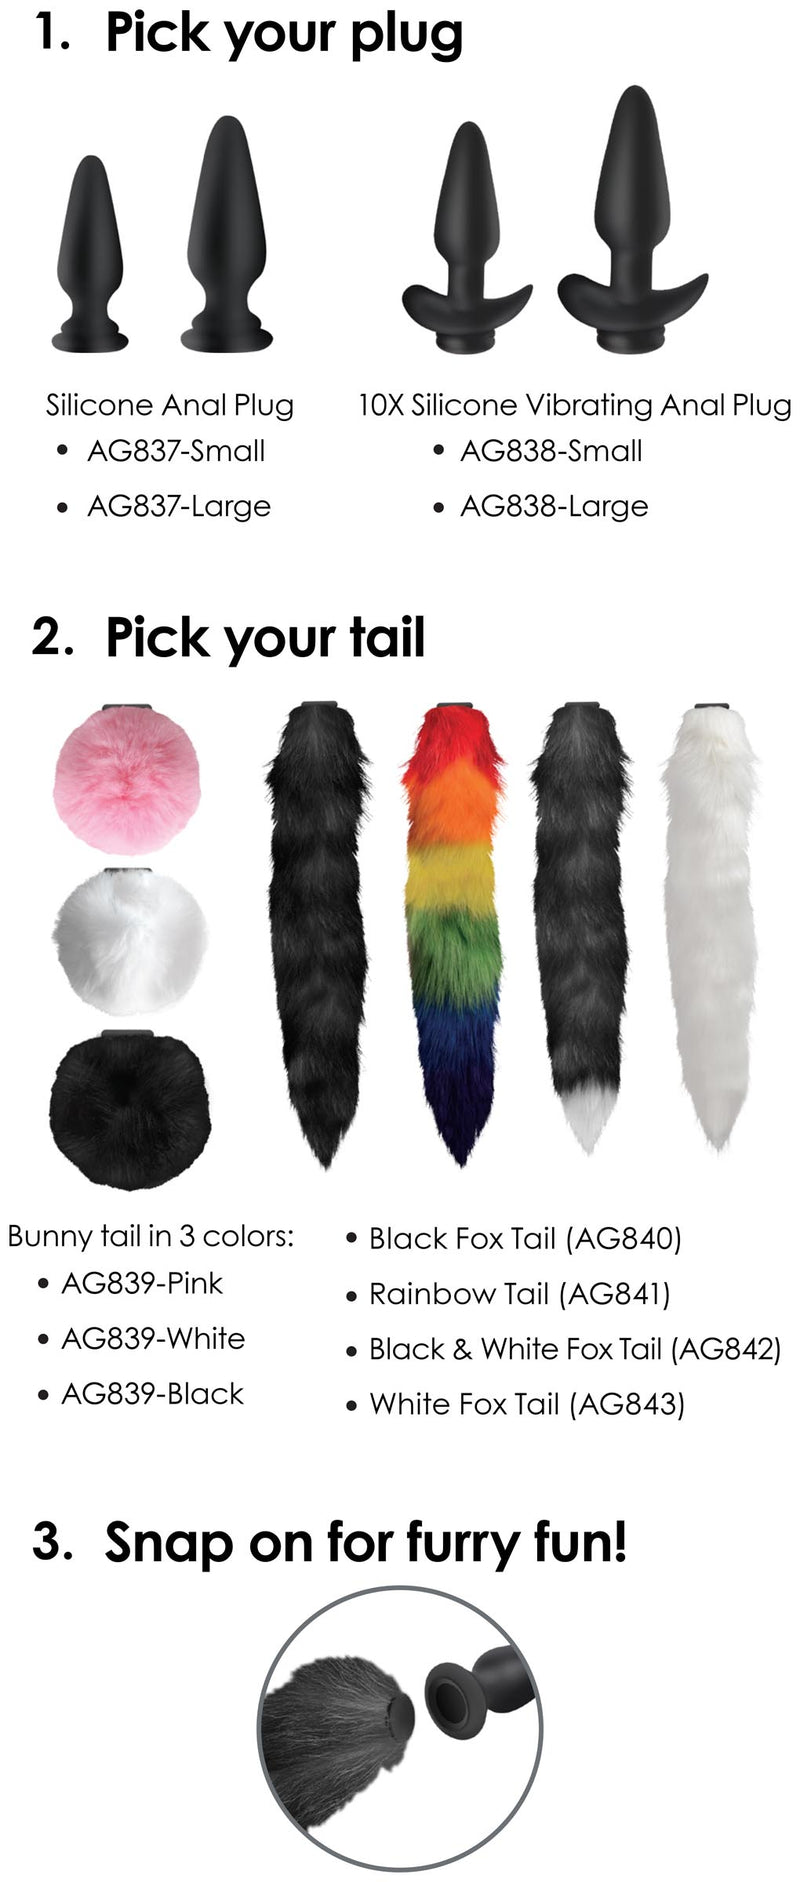 Large Vibrating Anal Plug with Interchangeable Fox Tail - White butt-plugs from Tailz